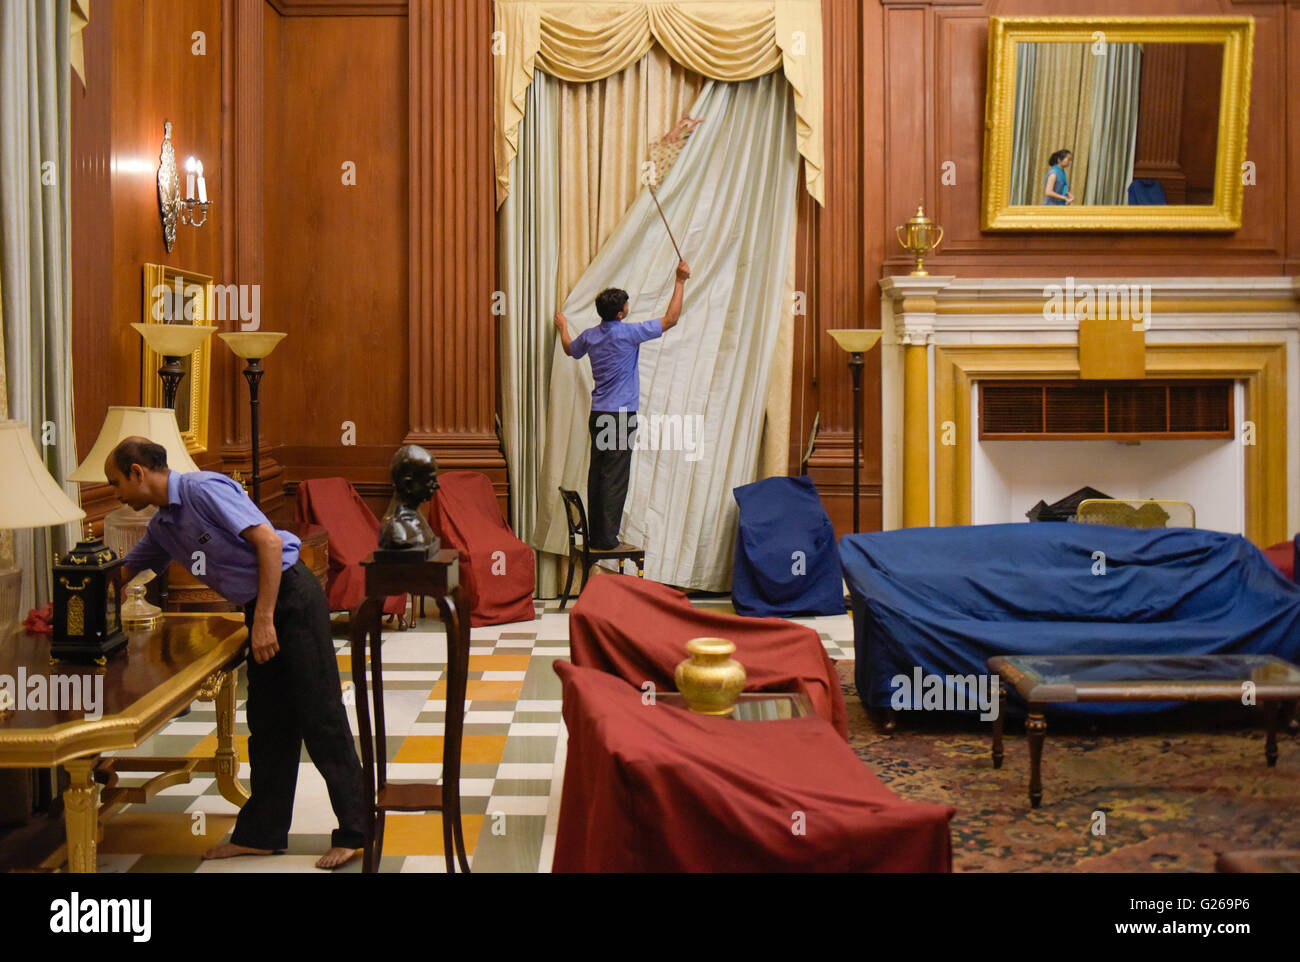 (160525) -- EW DELHI, May 25, 2016 (Xinhua) -- Janitors clean a room used for meetings with visiting foreign leaders at the Rashtrapati Bhavan in New Delhi, India, May 22, 2016. Rashtrapati Bhavan, or Presidential Residence of India, locates on the Raisina Hill in the capital city. Designed by Britain architect Sir Edwin Lutyens as the home of the Viceroys of India in 1921 and completed in 1929, the building contains over 2.4 km corridors, 340 rooms and 227 columns. In the year 1950 it was renamed as Rashtrapati Bhavan when Rajendra Prasad became the first President of India and occupied this  Stock Photo